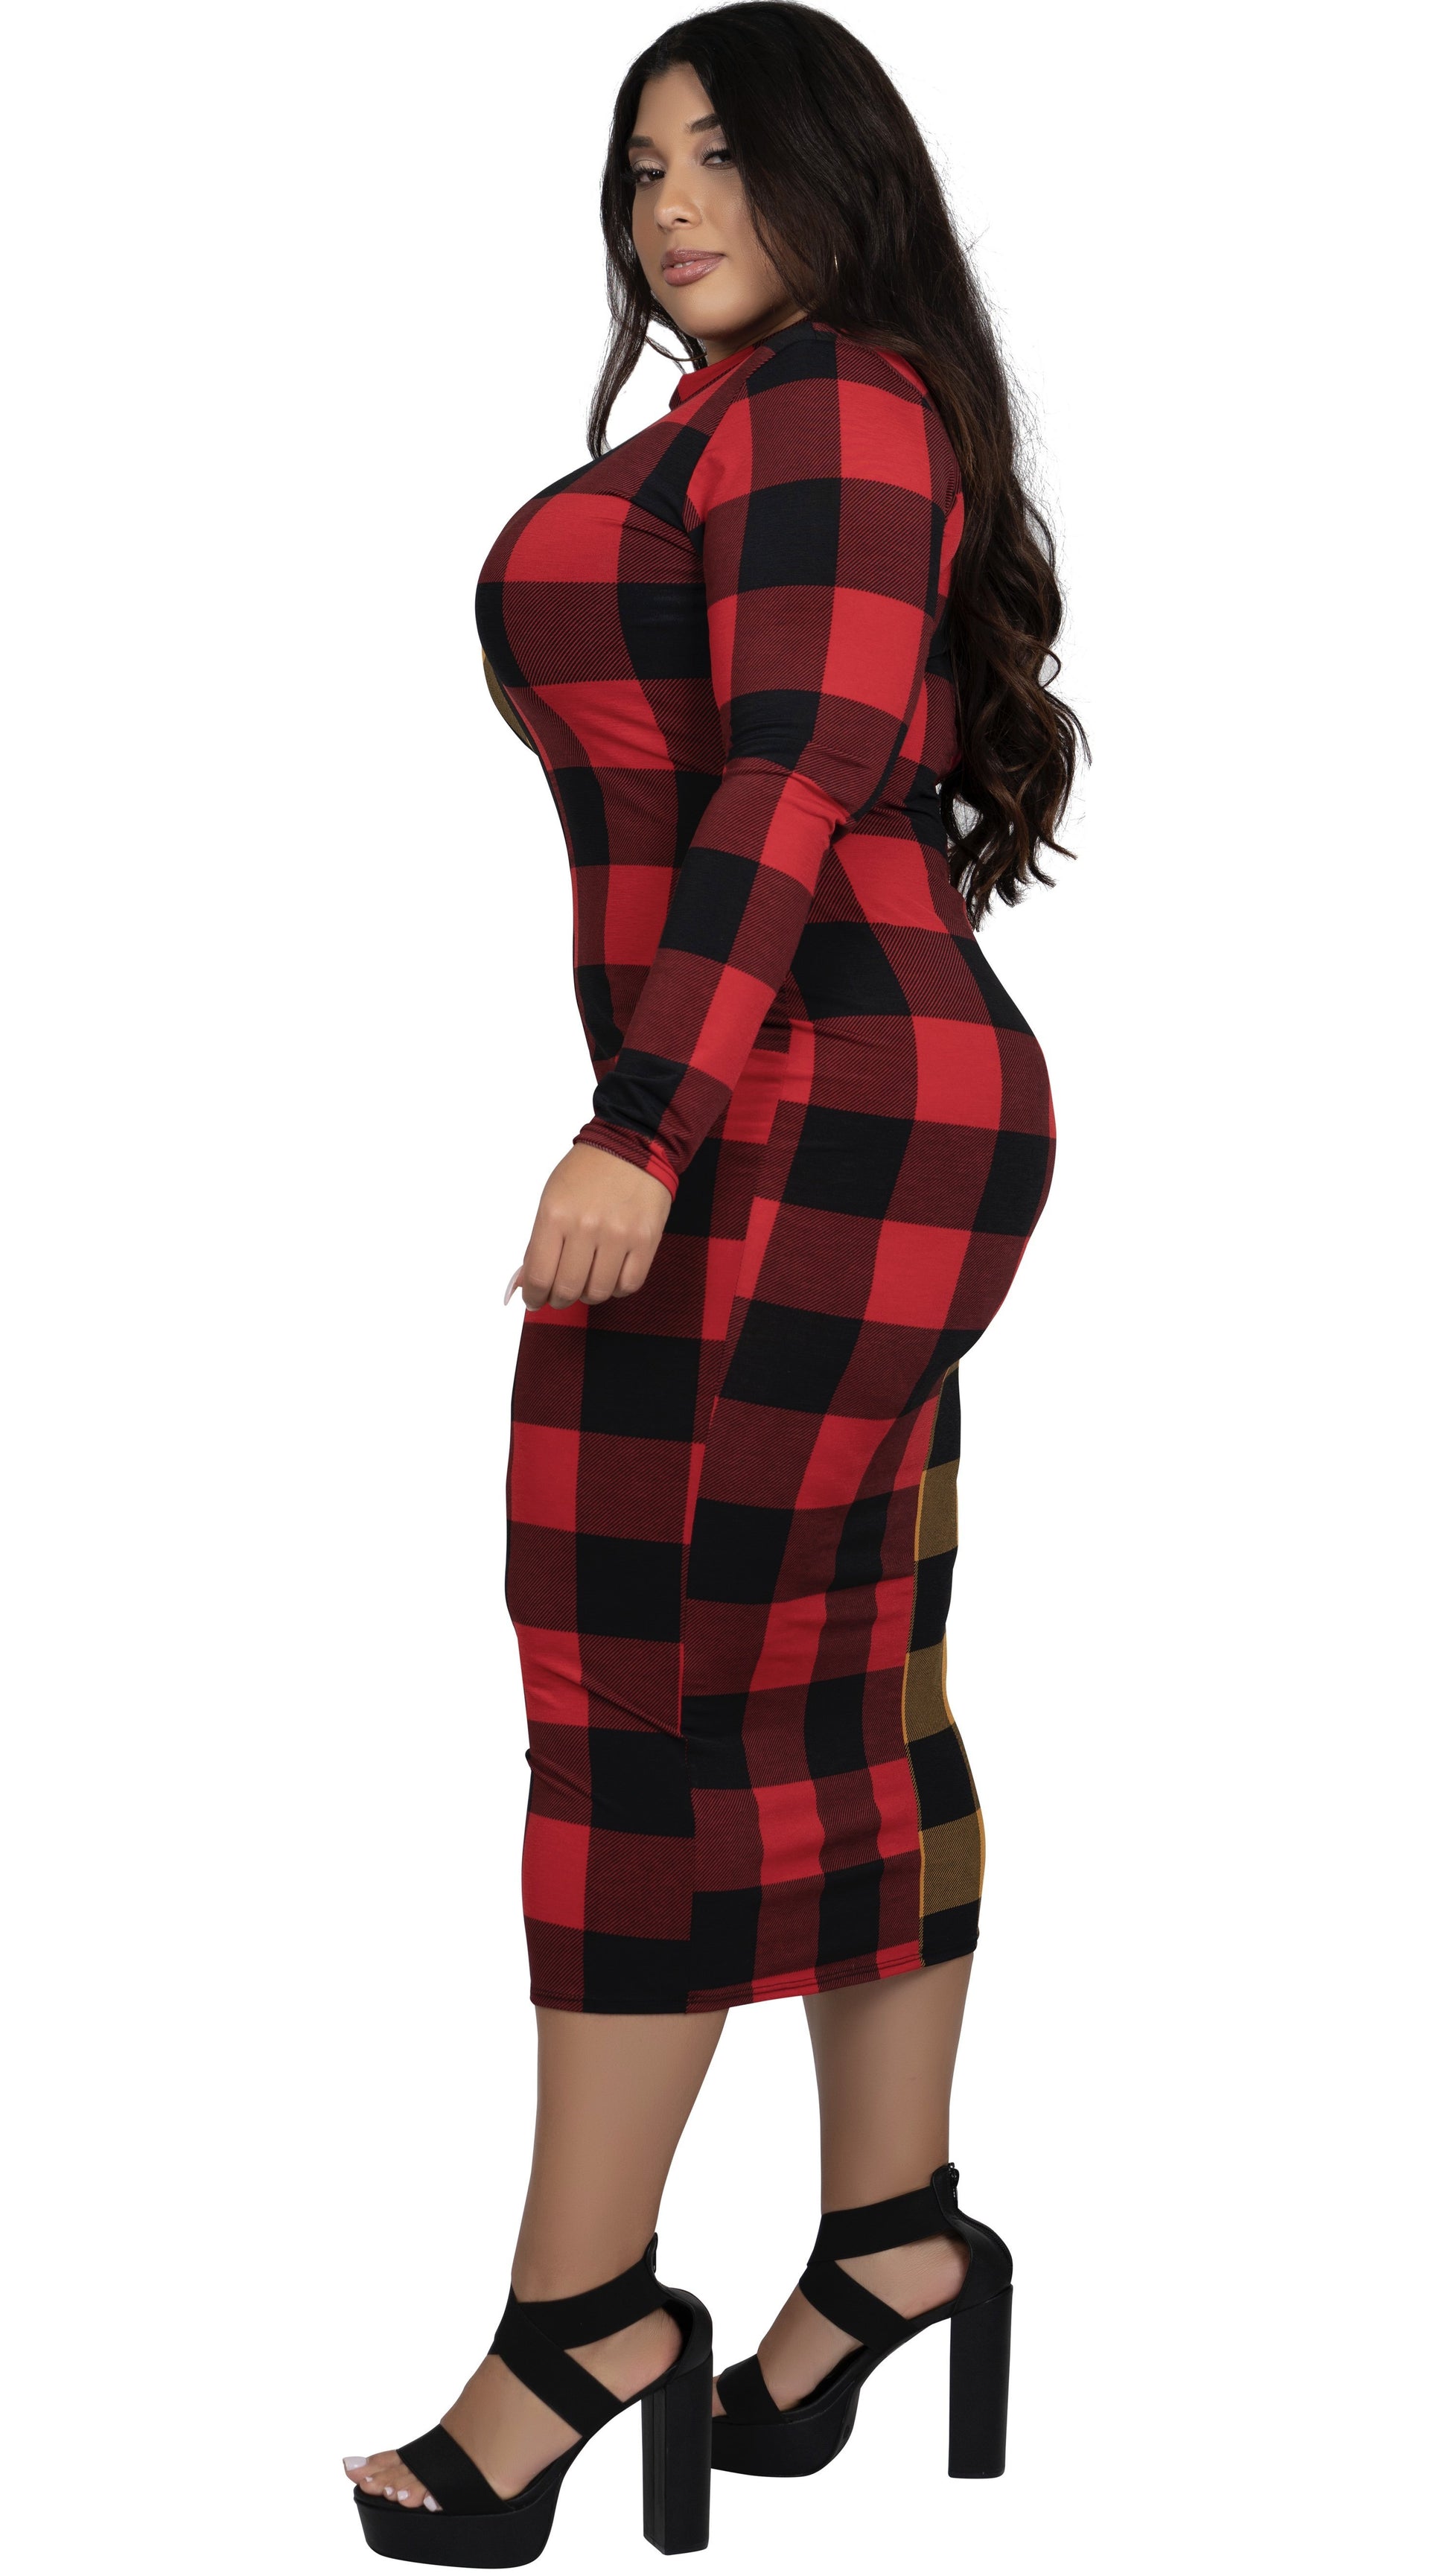 Best Of Both Worlds Dress (Red/Mustard Plaid)-Dresses-Boughie-Boughie